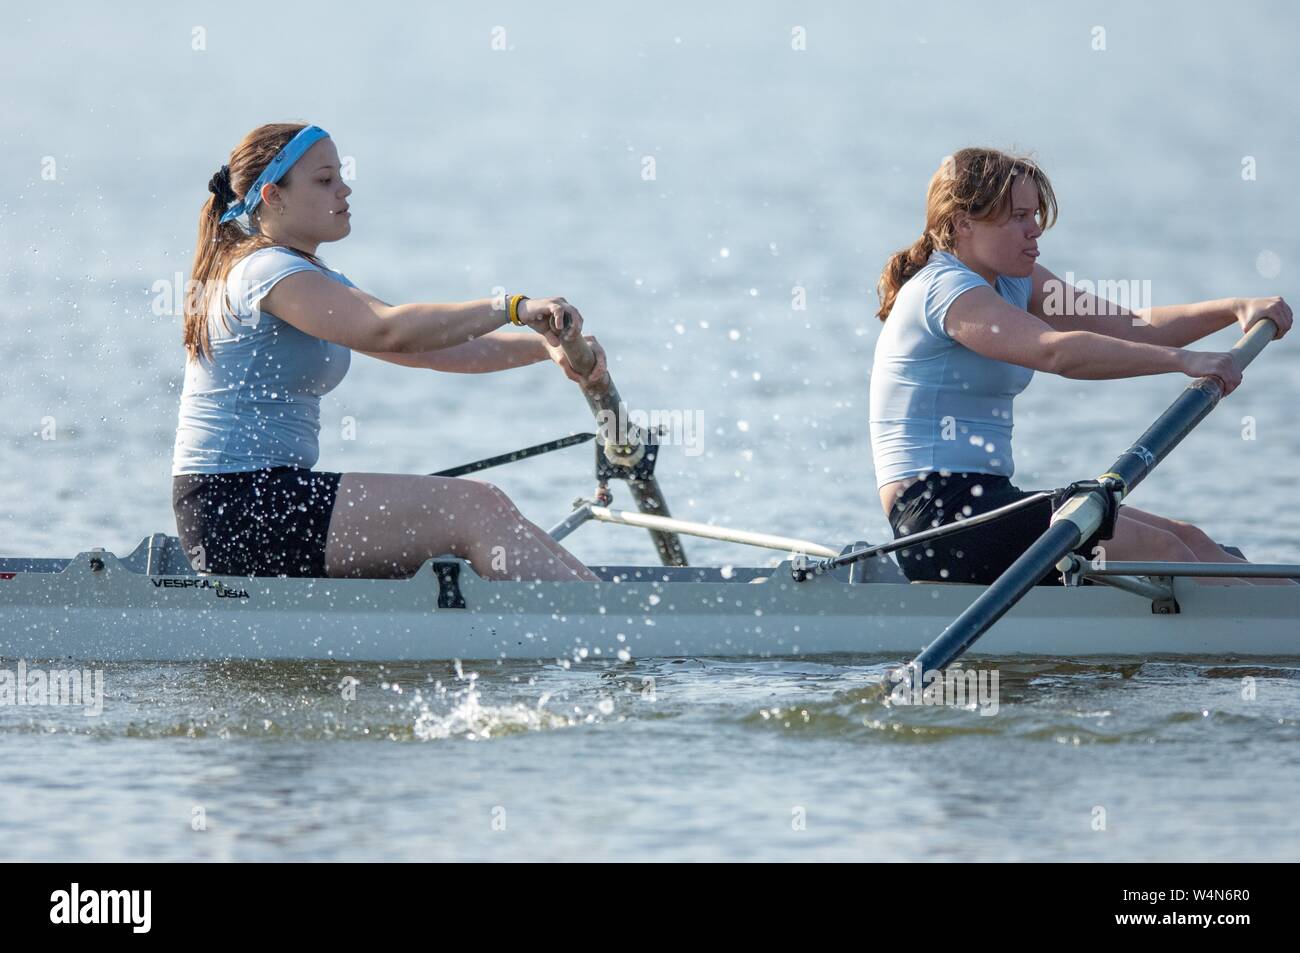 Rowers in a racing shell boat compete in a Johns Hopkins University crew invitational event in Baltimore, Maryland, April 15, 2006. From the Homewood Photography collection. () Stock Photo